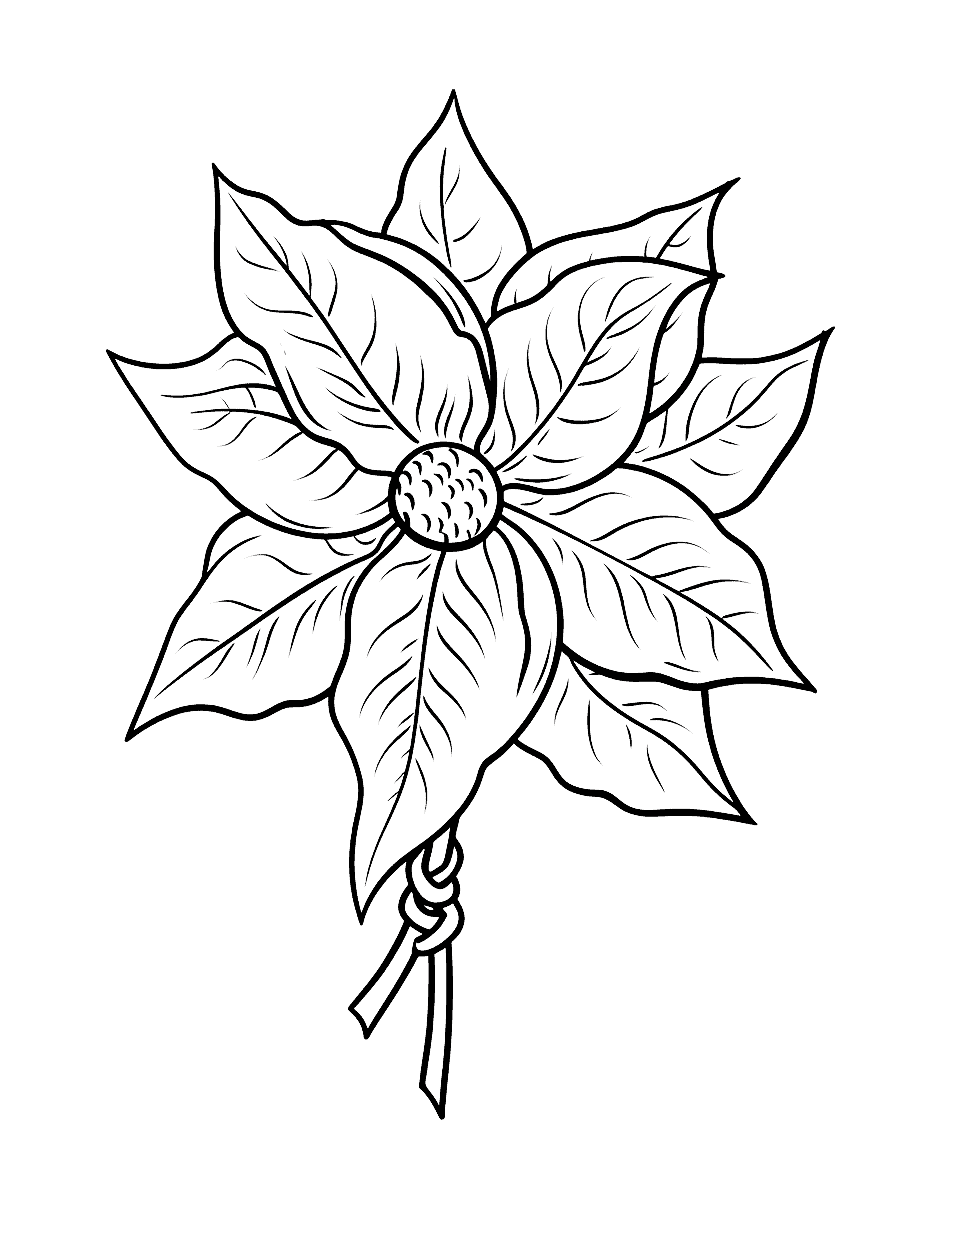 Poinsettia Plant Christmas Coloring Page - A detailed poinsettia plant, a popular Christmas flower.